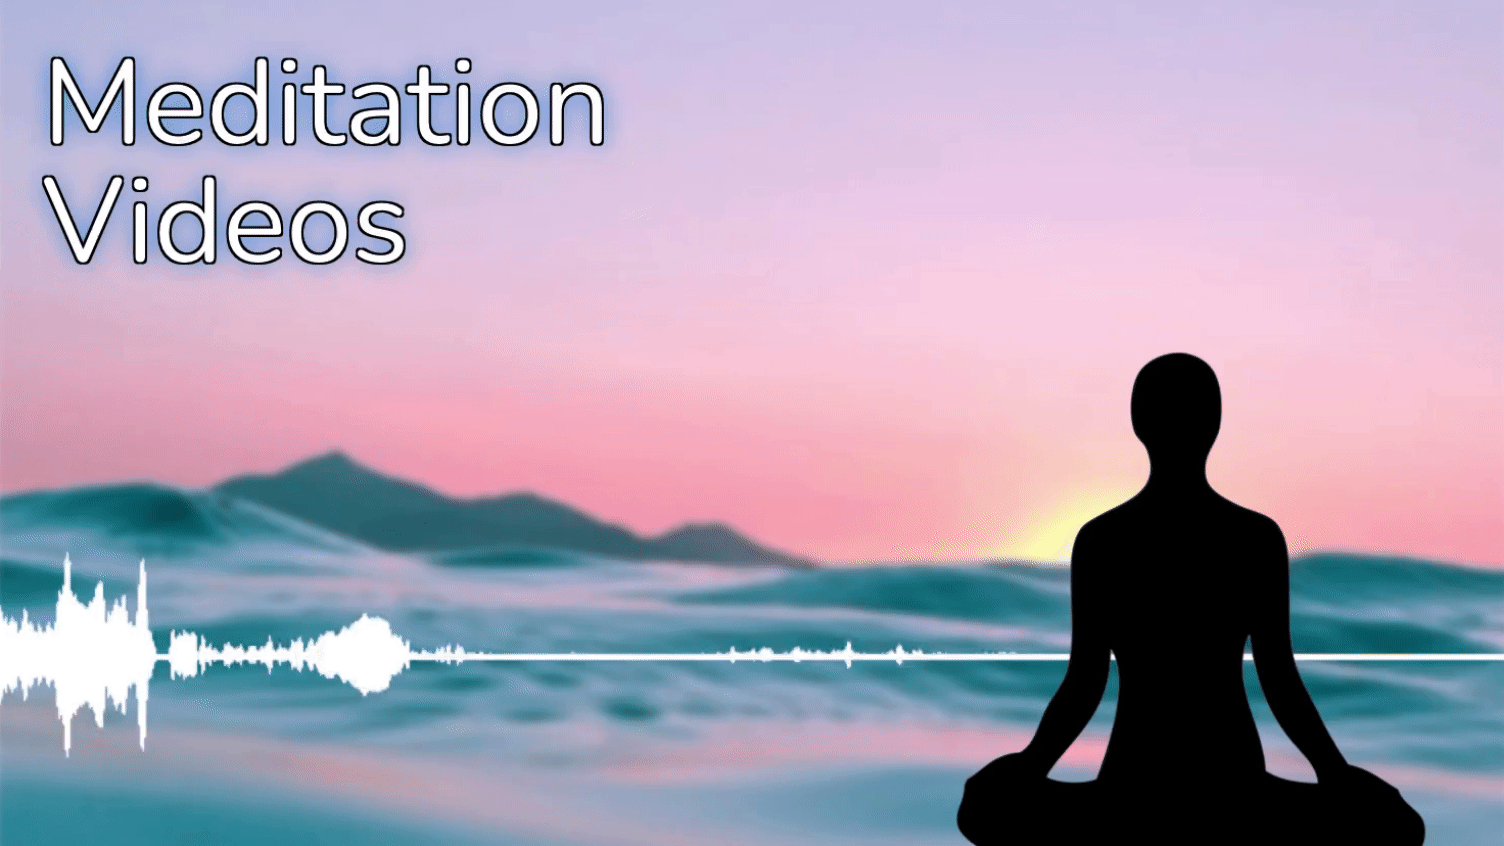 How to Make Your Own Meditation Video Online